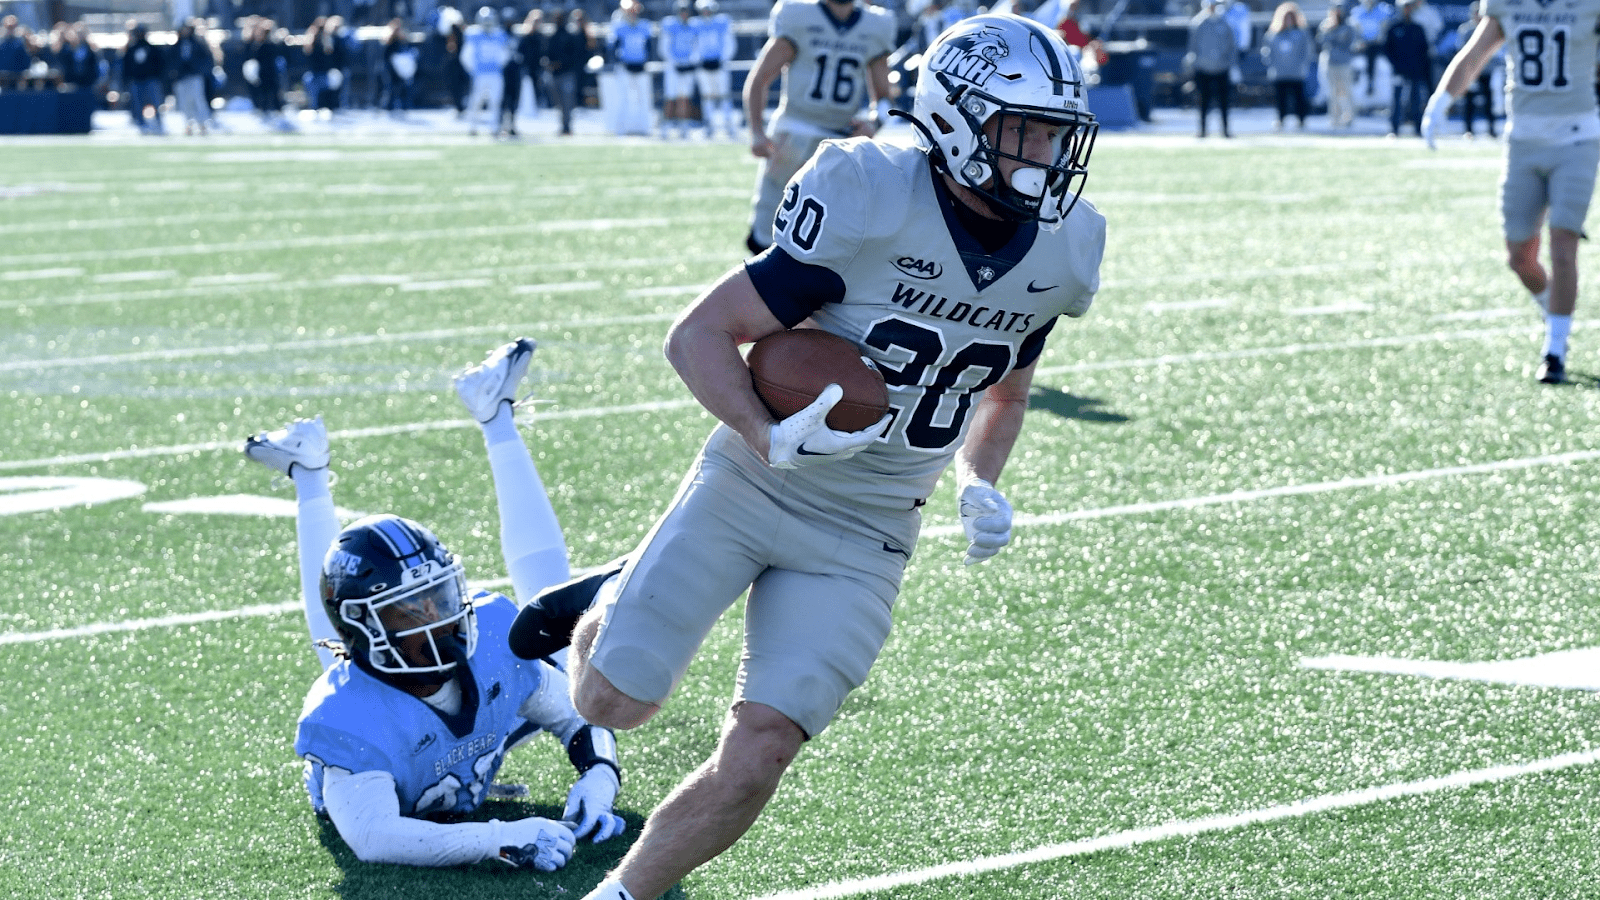 Dylan Laube is a versatile RB out of New Hampshire with good vision and twitch. Hula Bowl scout Ryan Jaffe breaks down Laube as an NFL Prospect in his report.